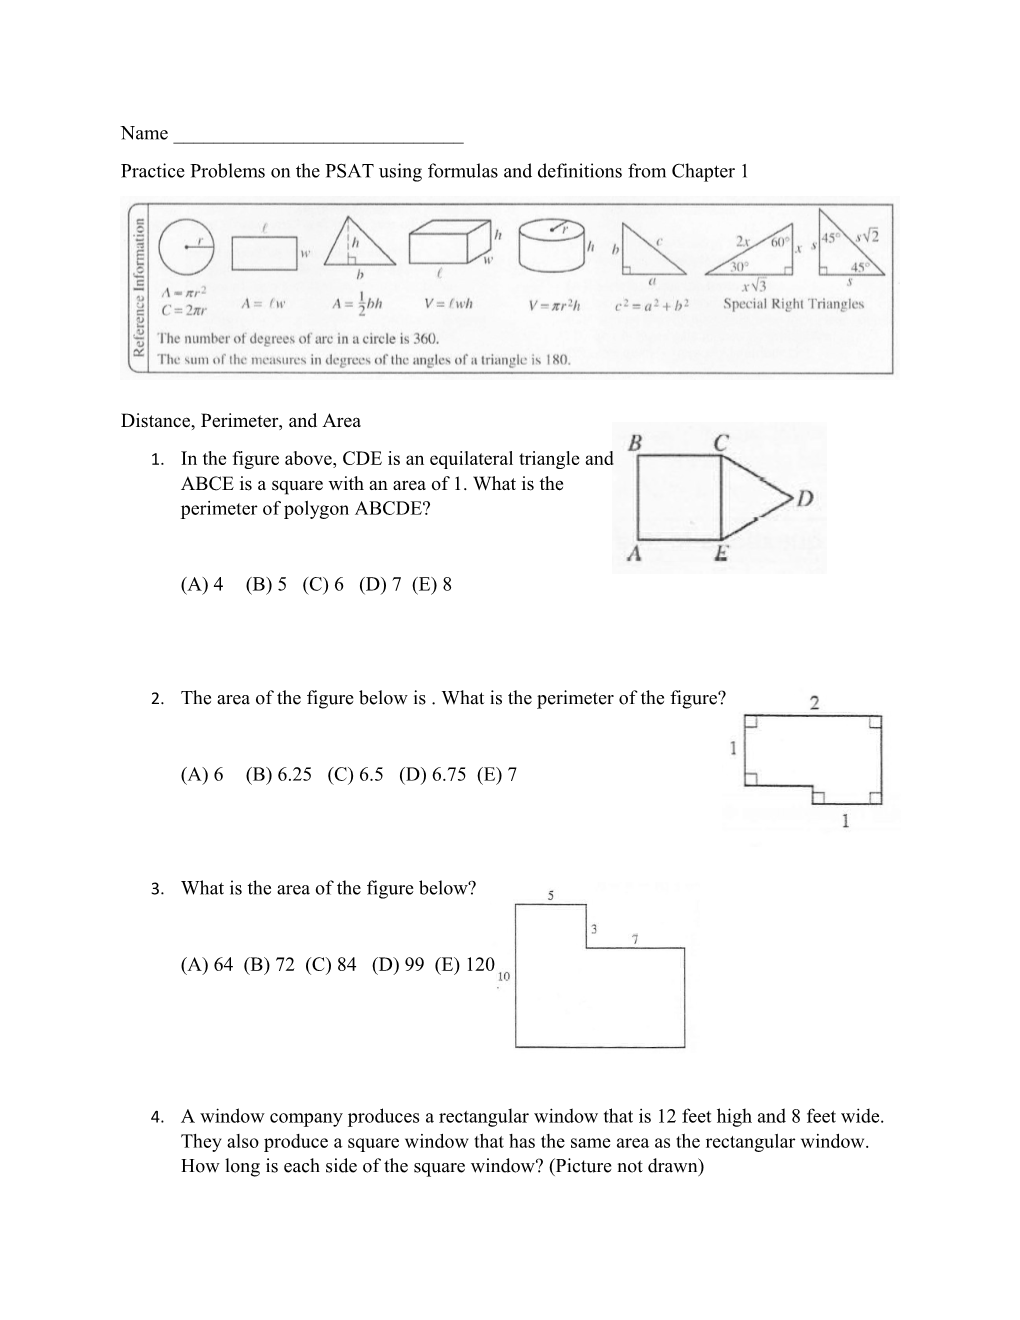 Practice Problems on the PSAT Using Formulas and Definitions from Chapter 1